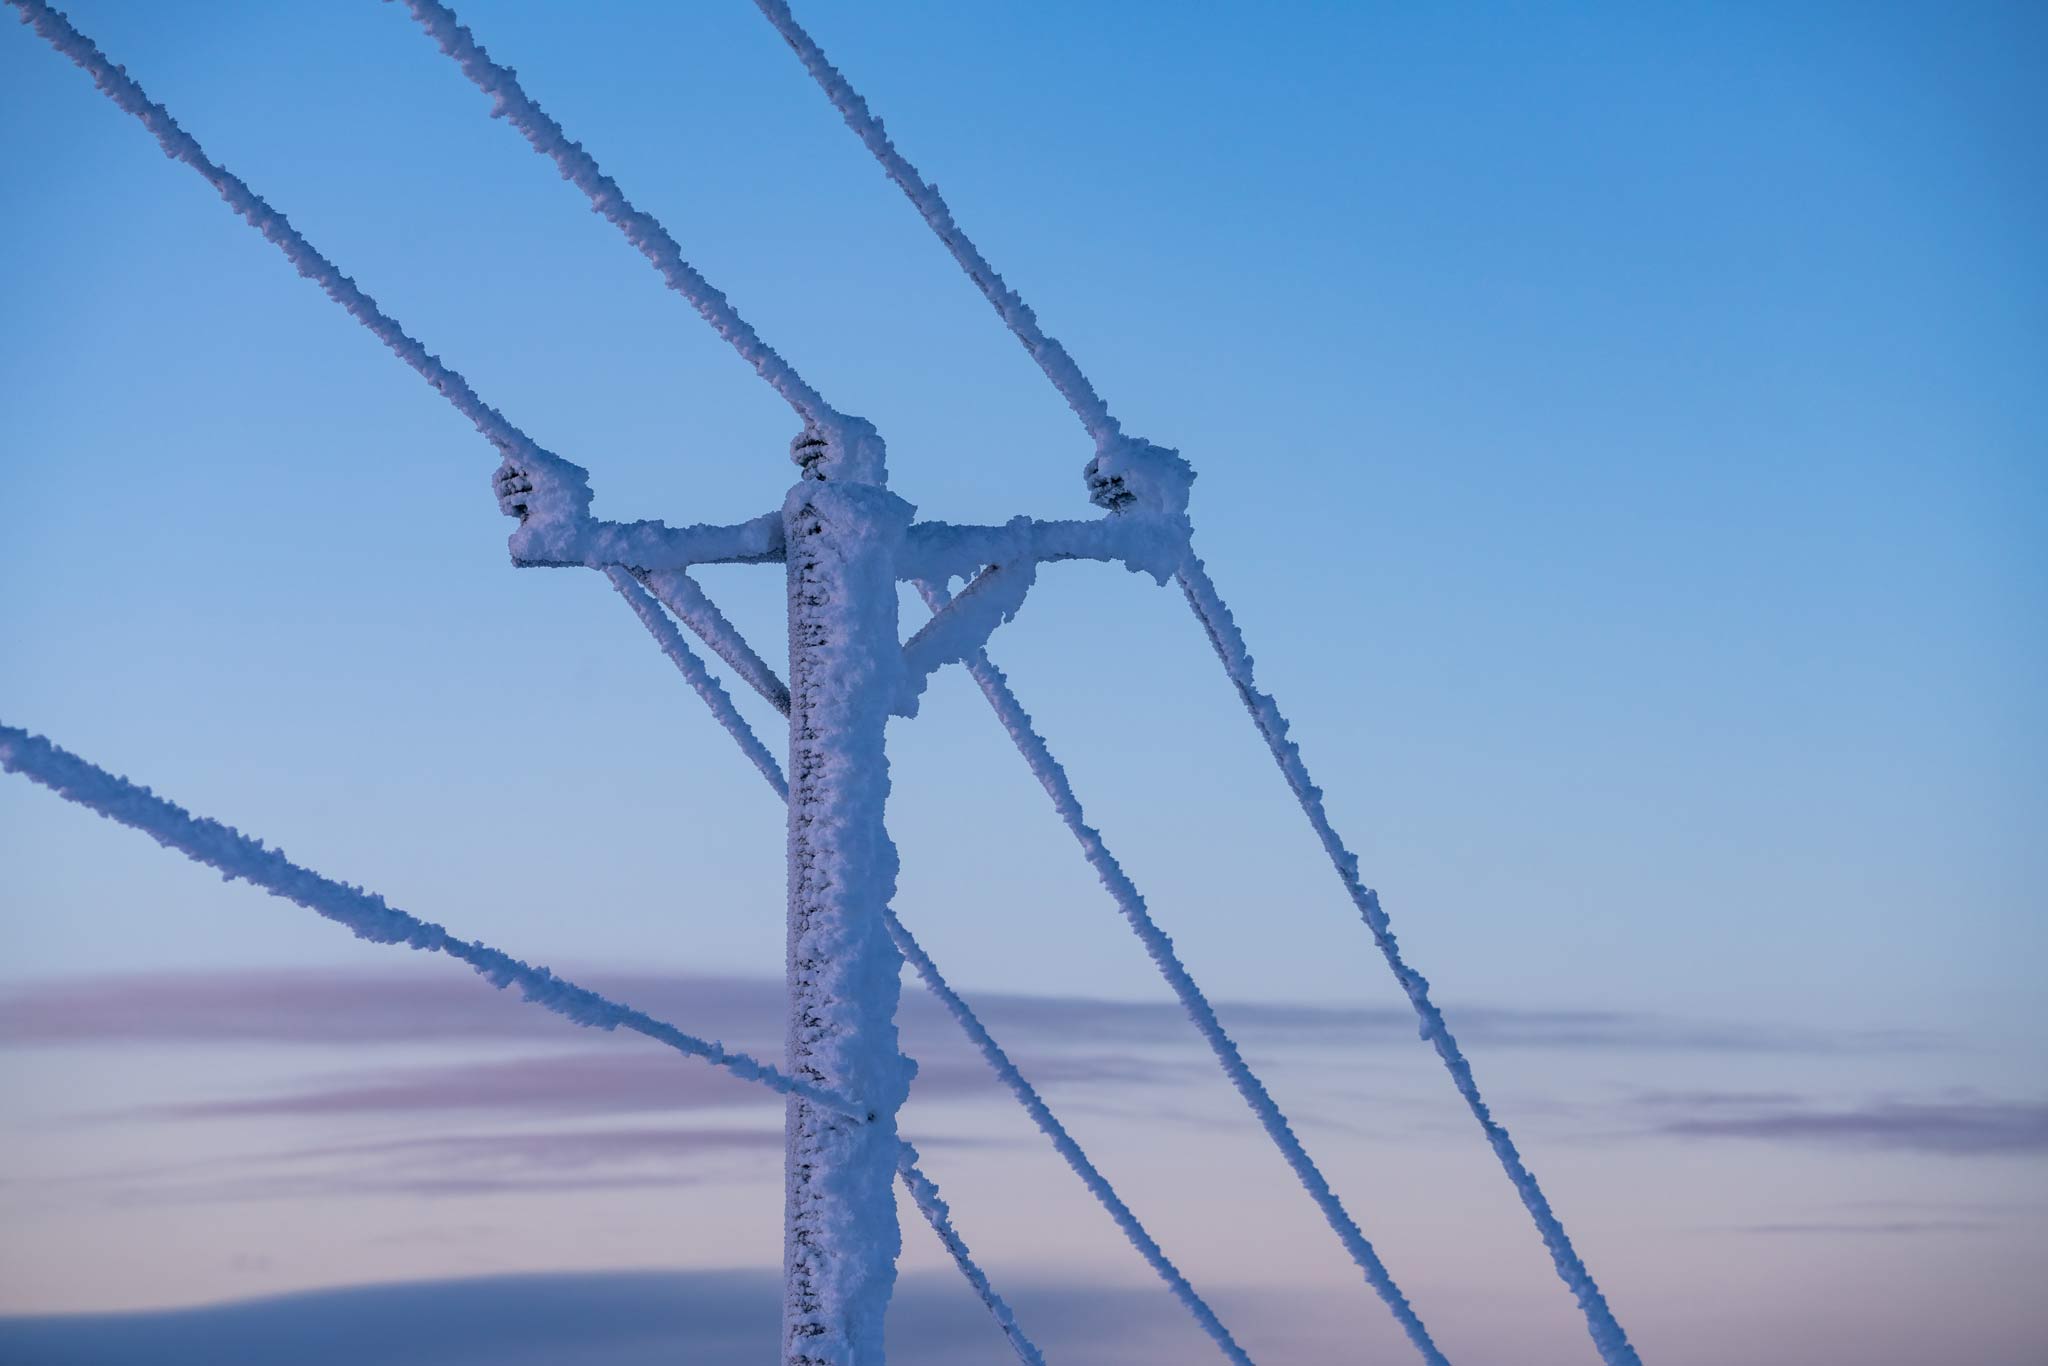 Snow and ice on power lines